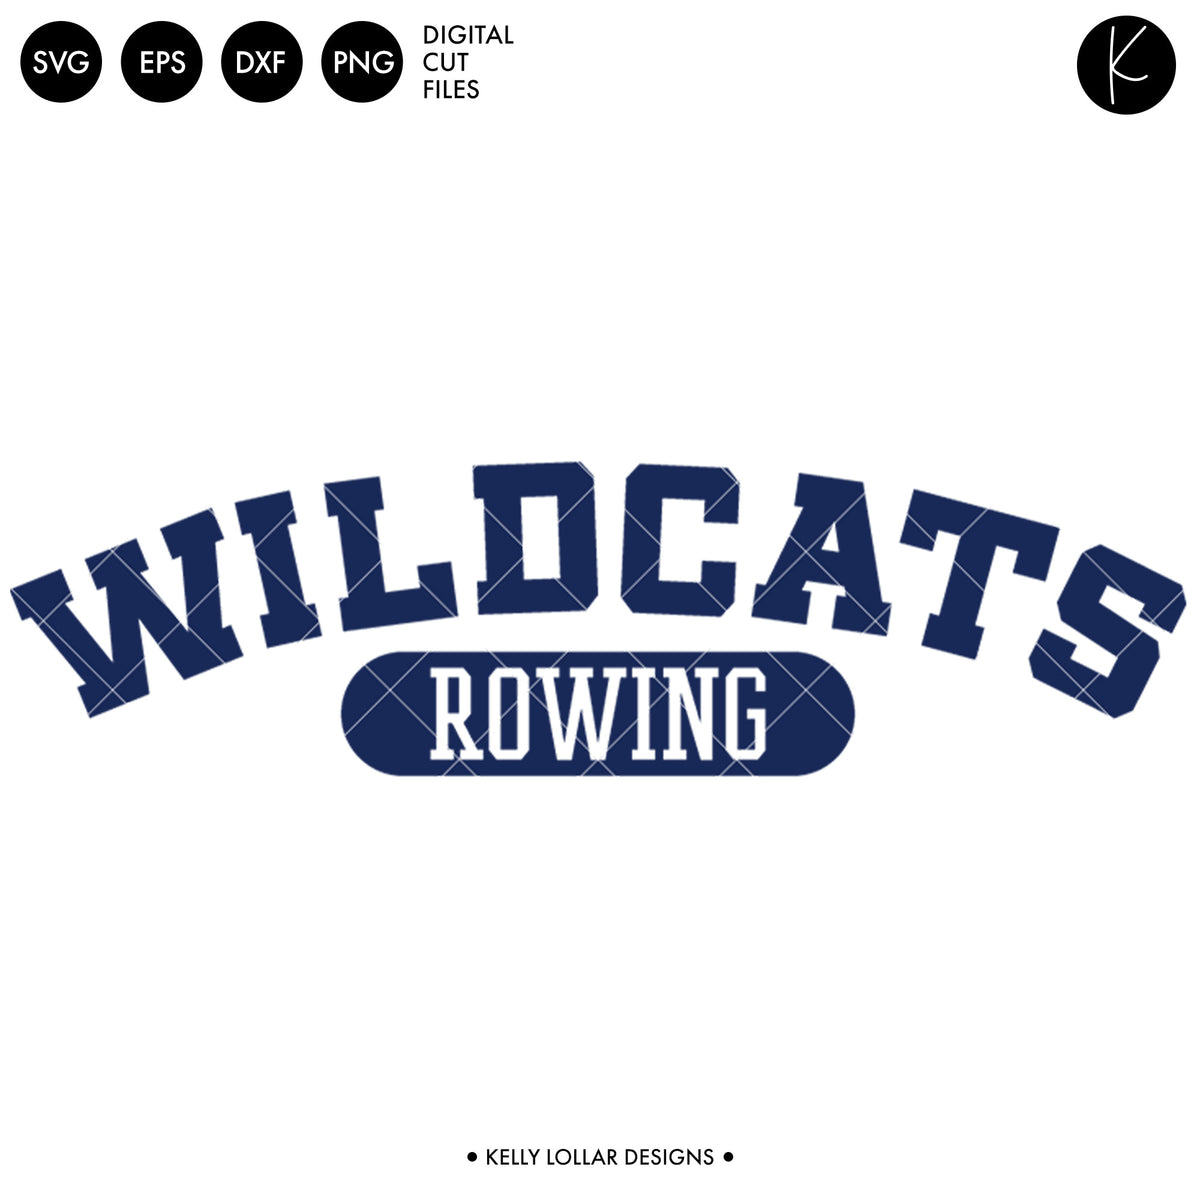 Wildcats Rowing Crew Bundle | SVG DXF EPS PNG Cut Files